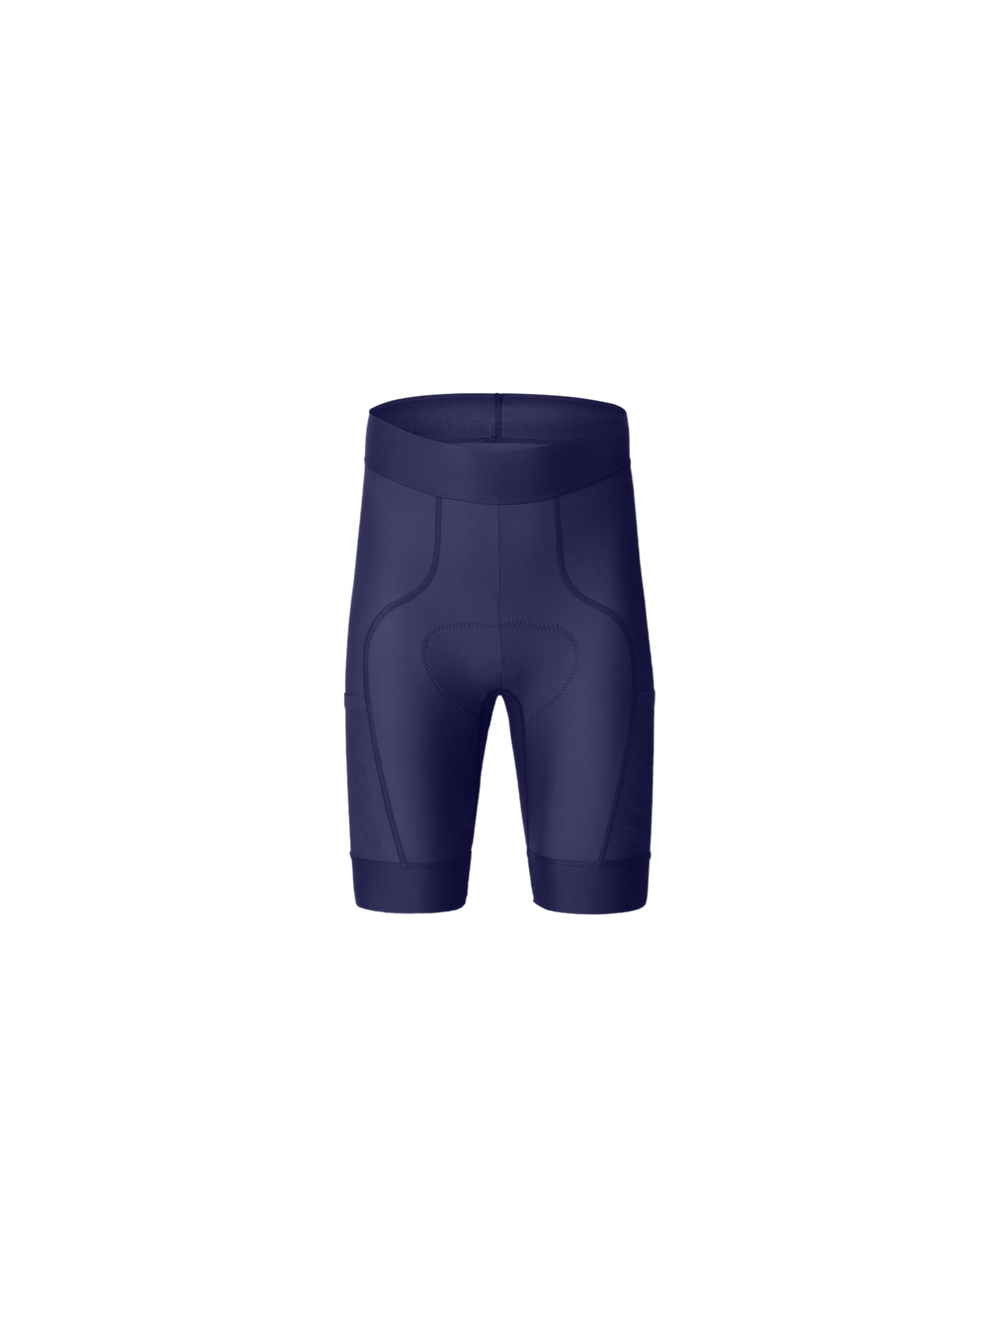 Product Image for Sequence Ride Short